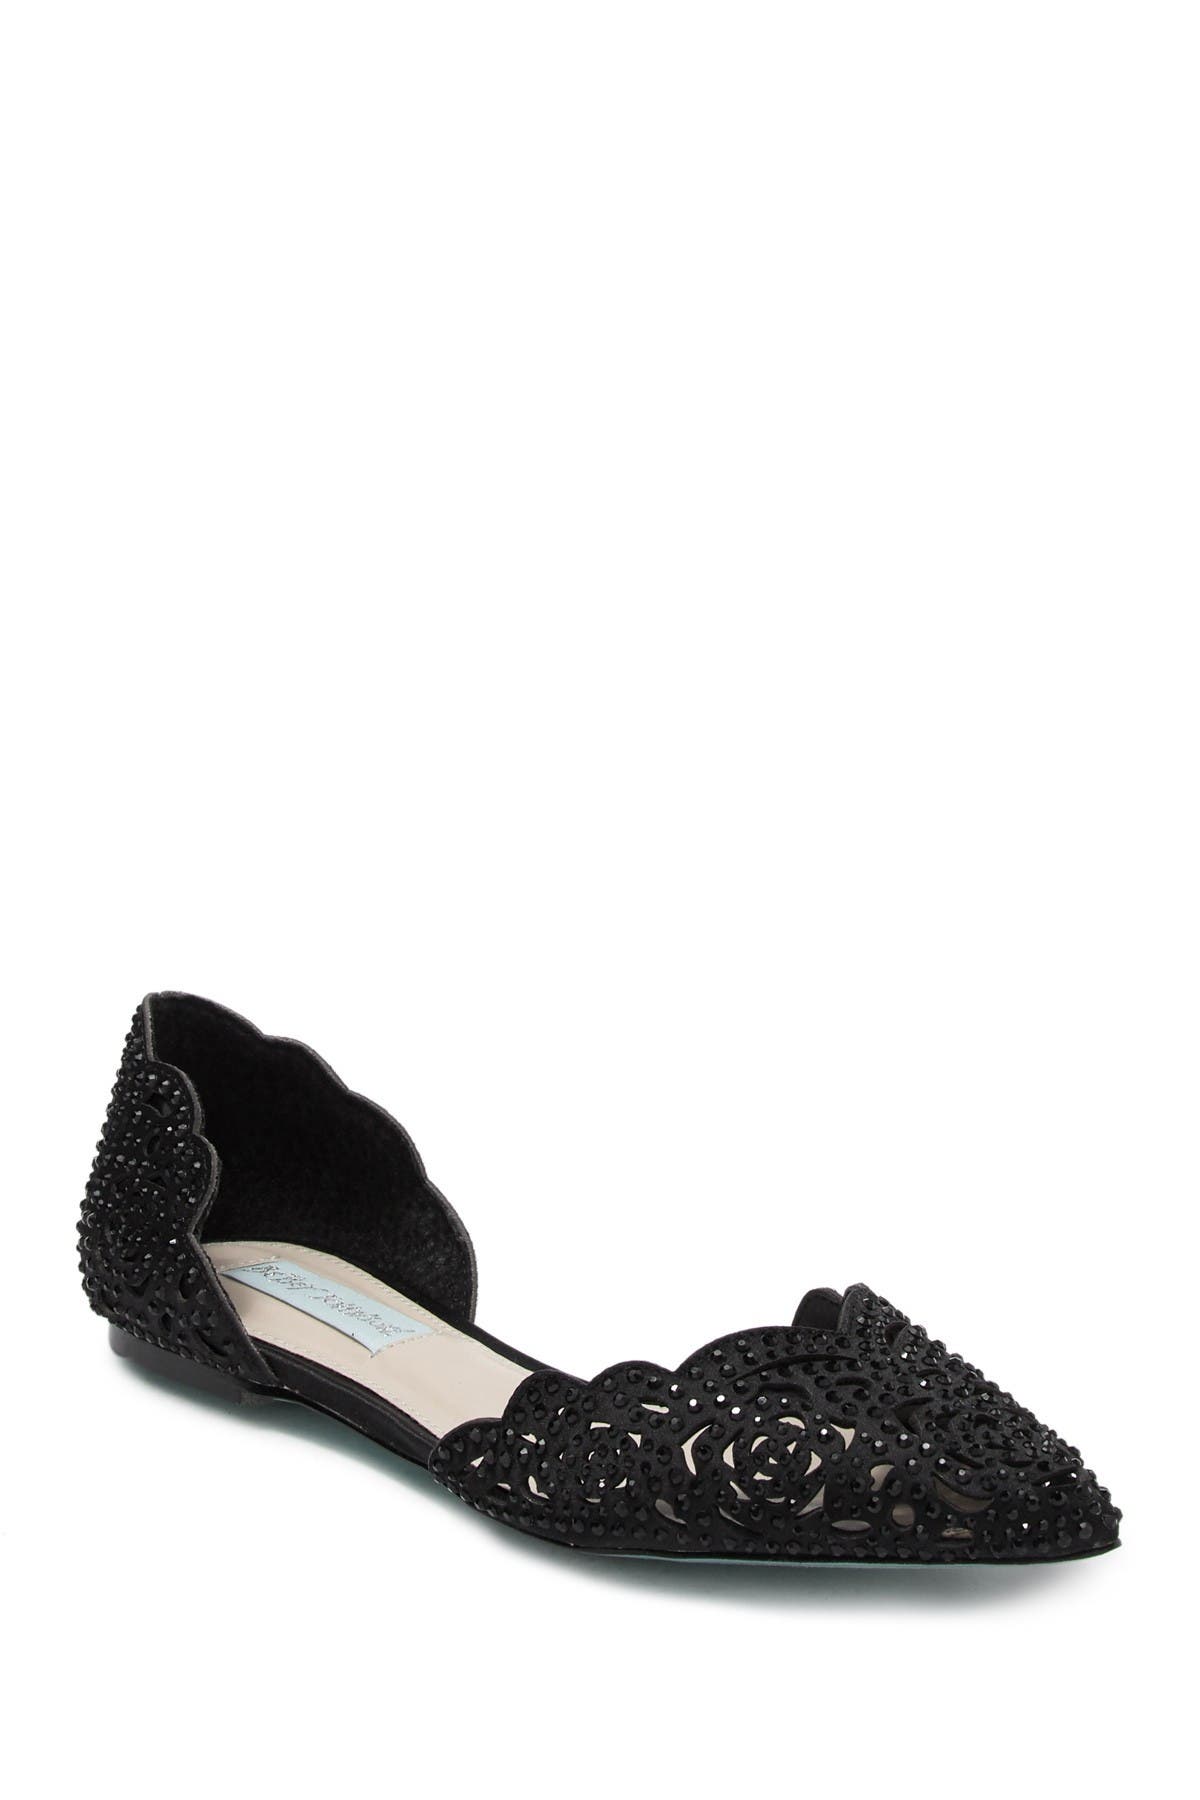 blue by betsey johnson lucy embellished flats